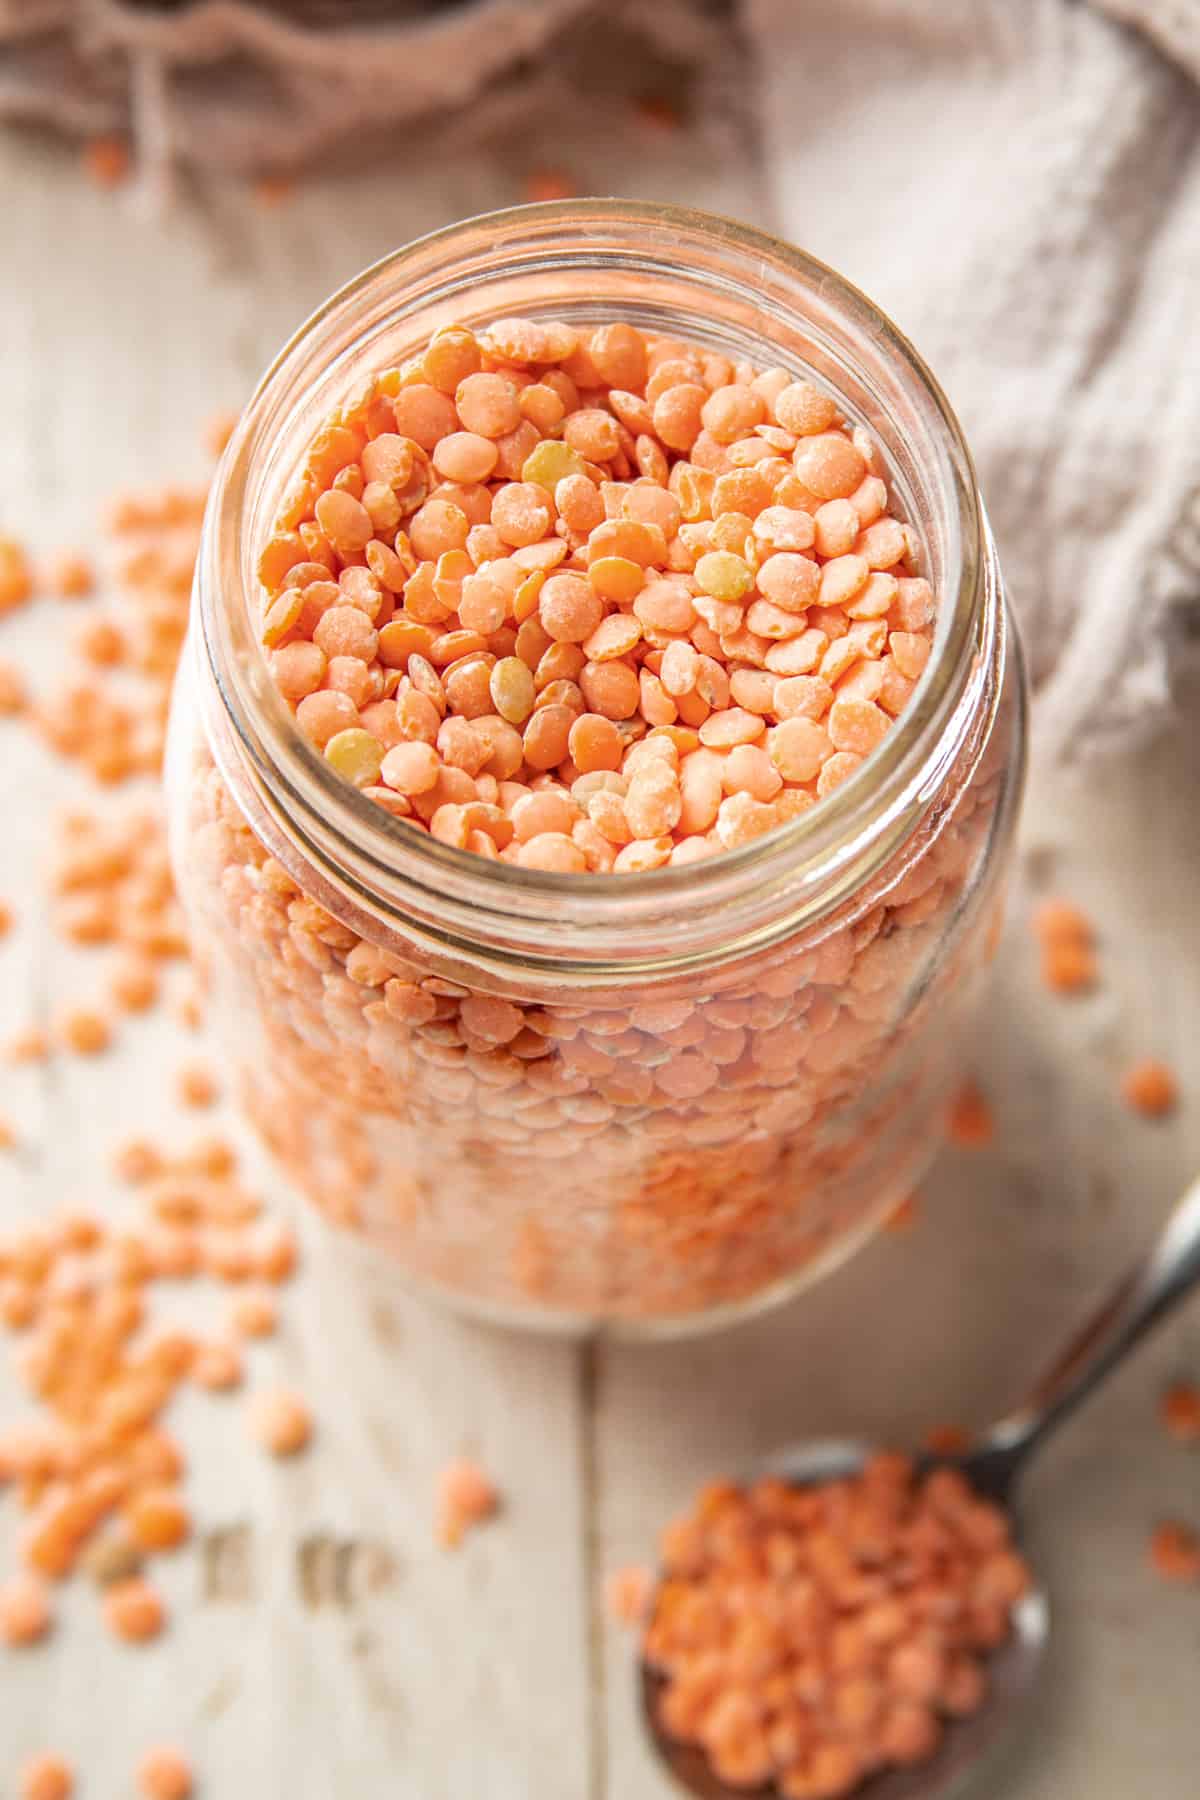 Jar of Red Lentils with spoon and scattered lentils in the foreground.